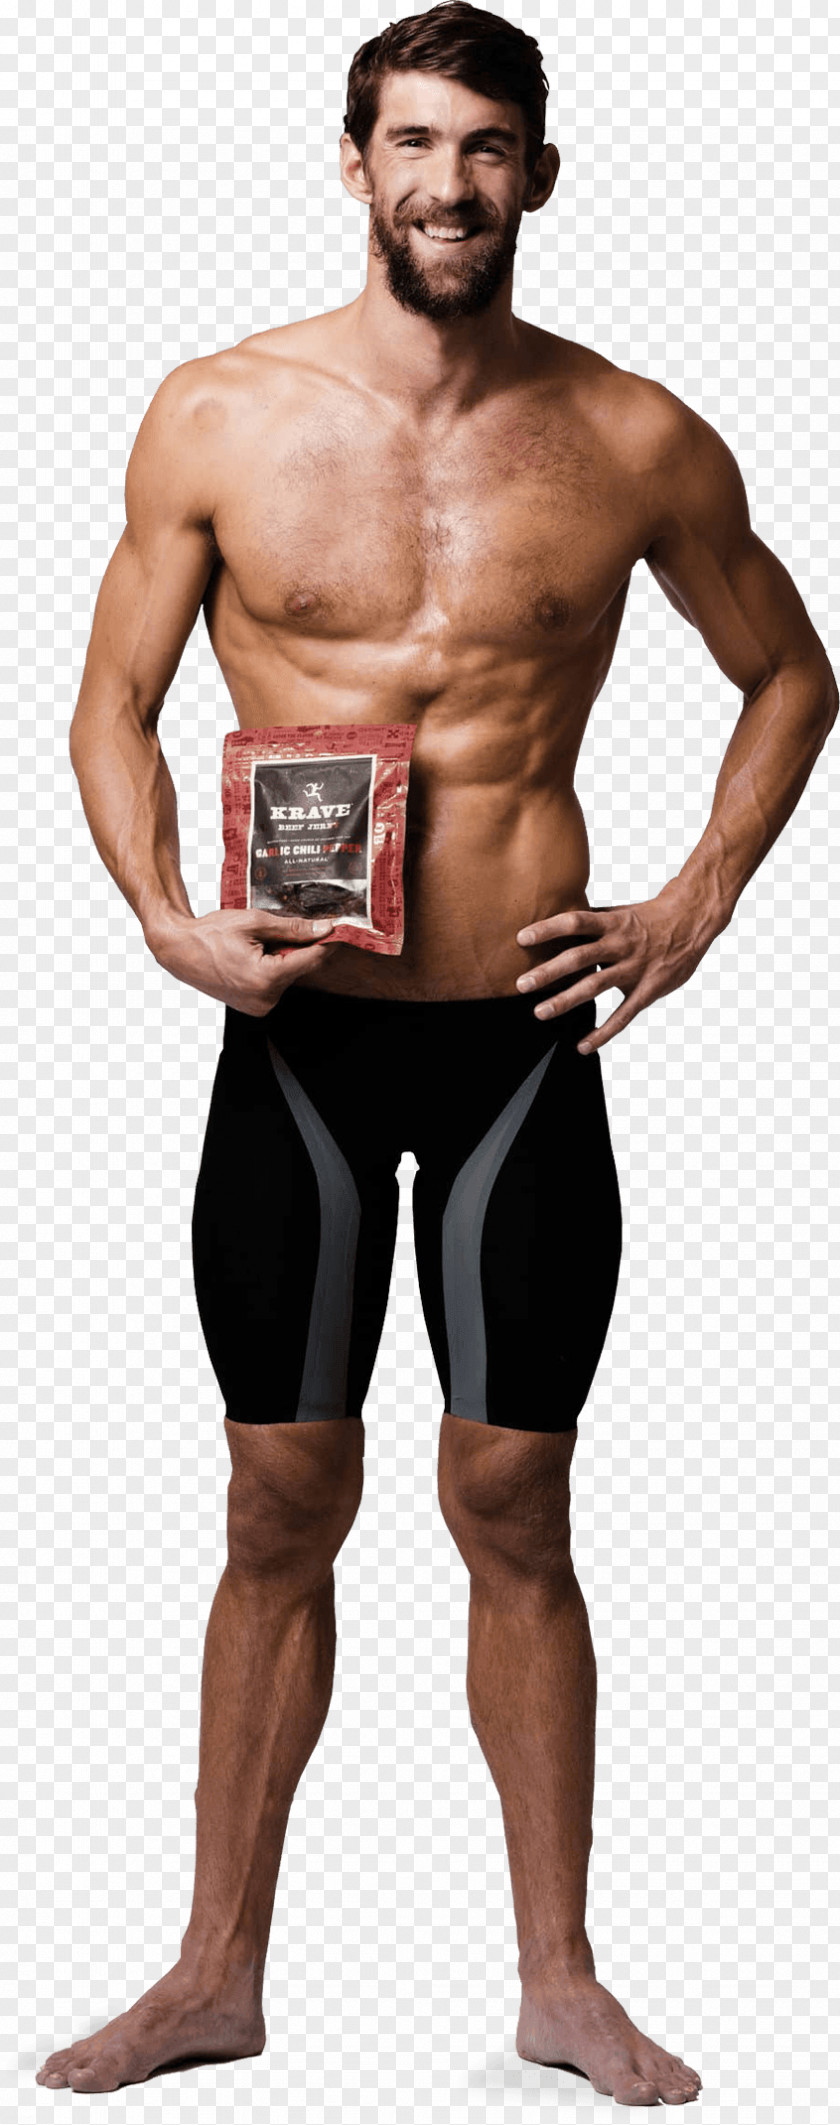 Mike Michael Phelps Athlete Male Krave Jerky Physical Fitness PNG